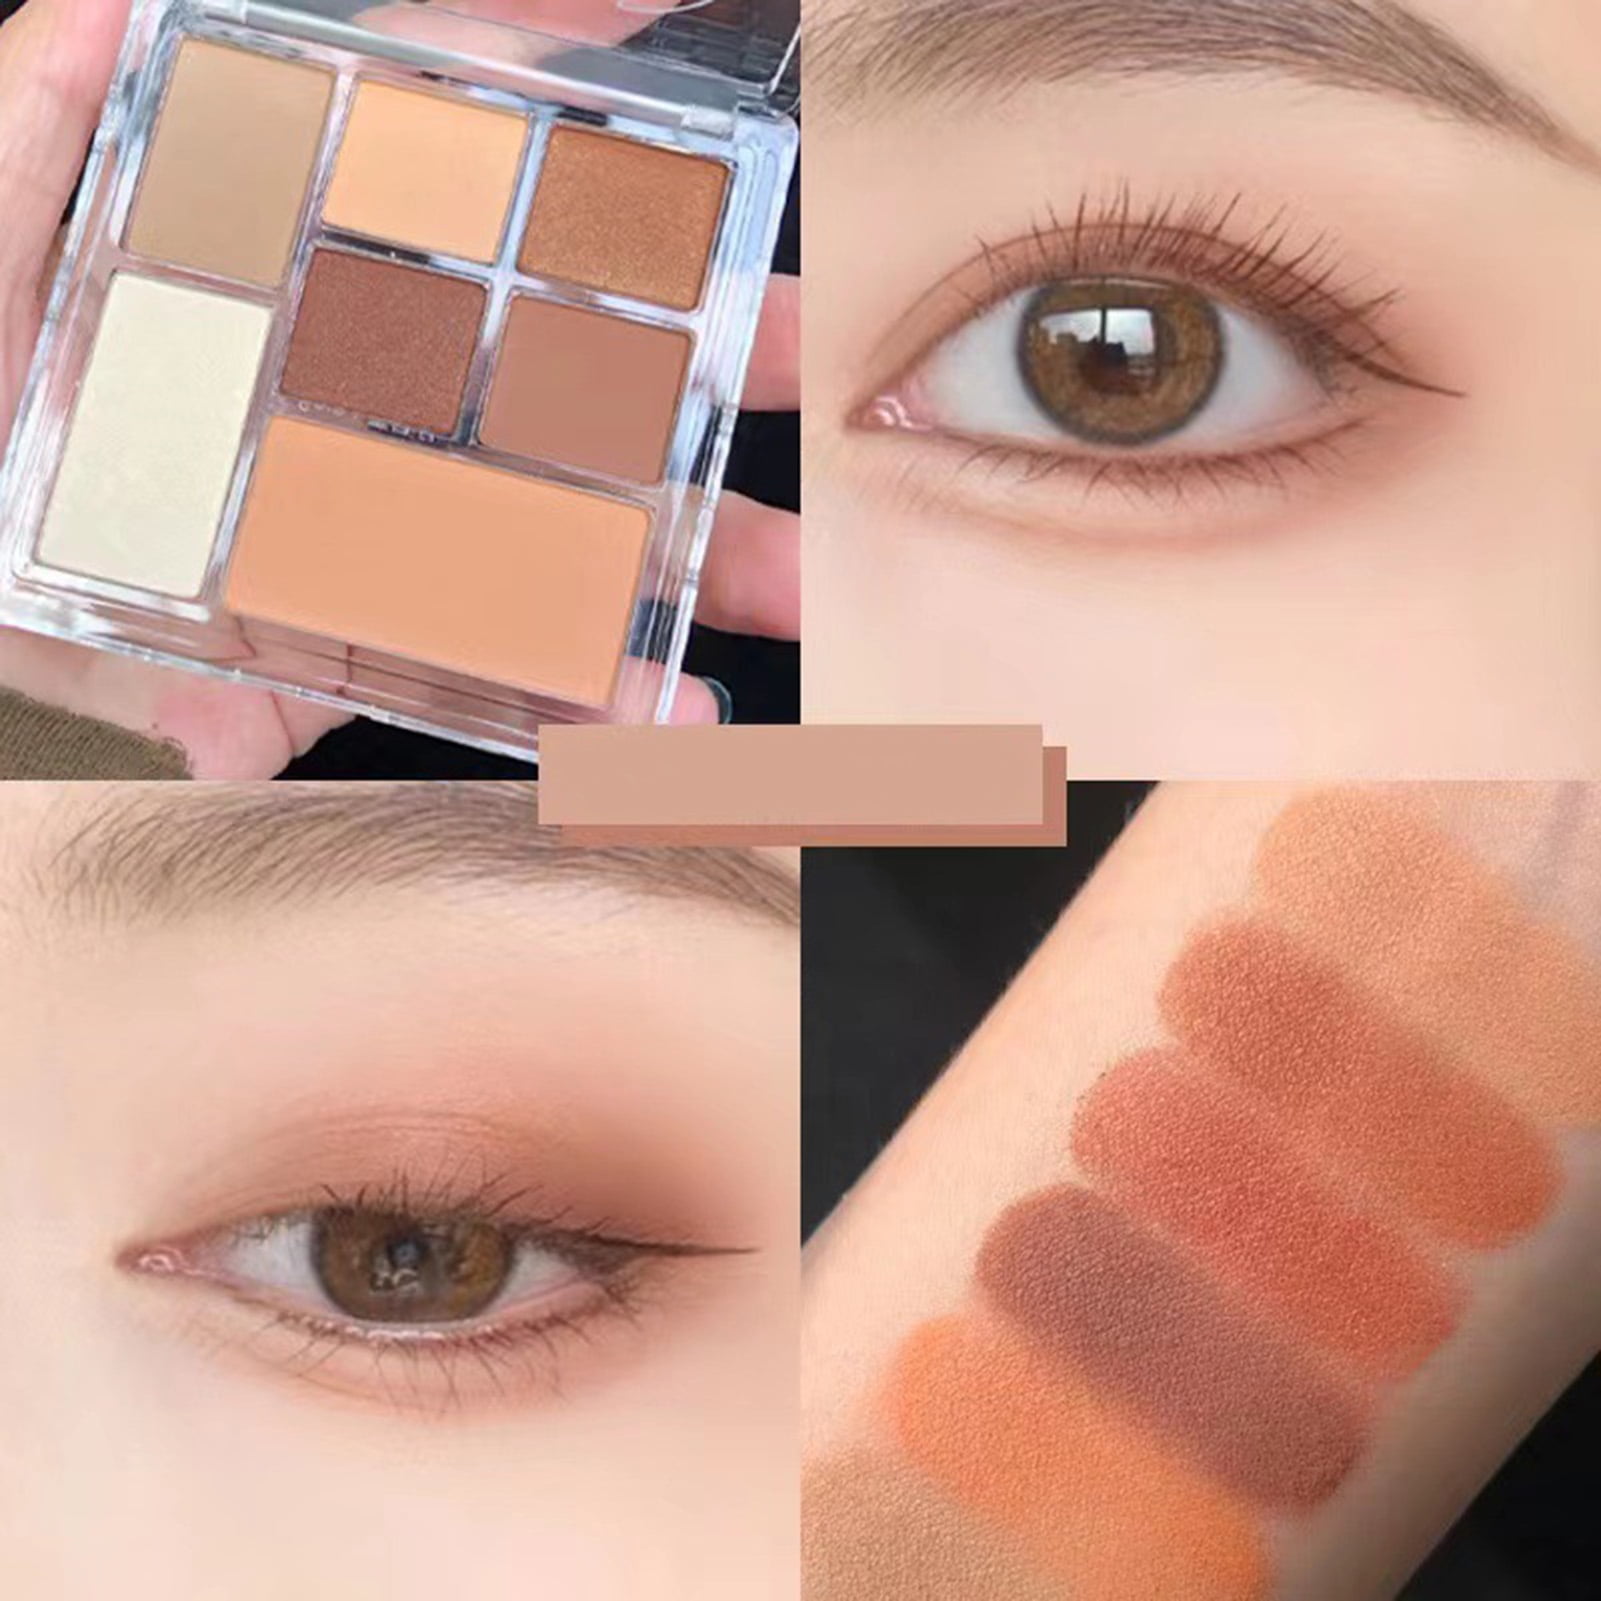 Easy makeup looks to try with a refillable palette - Nutrimetics